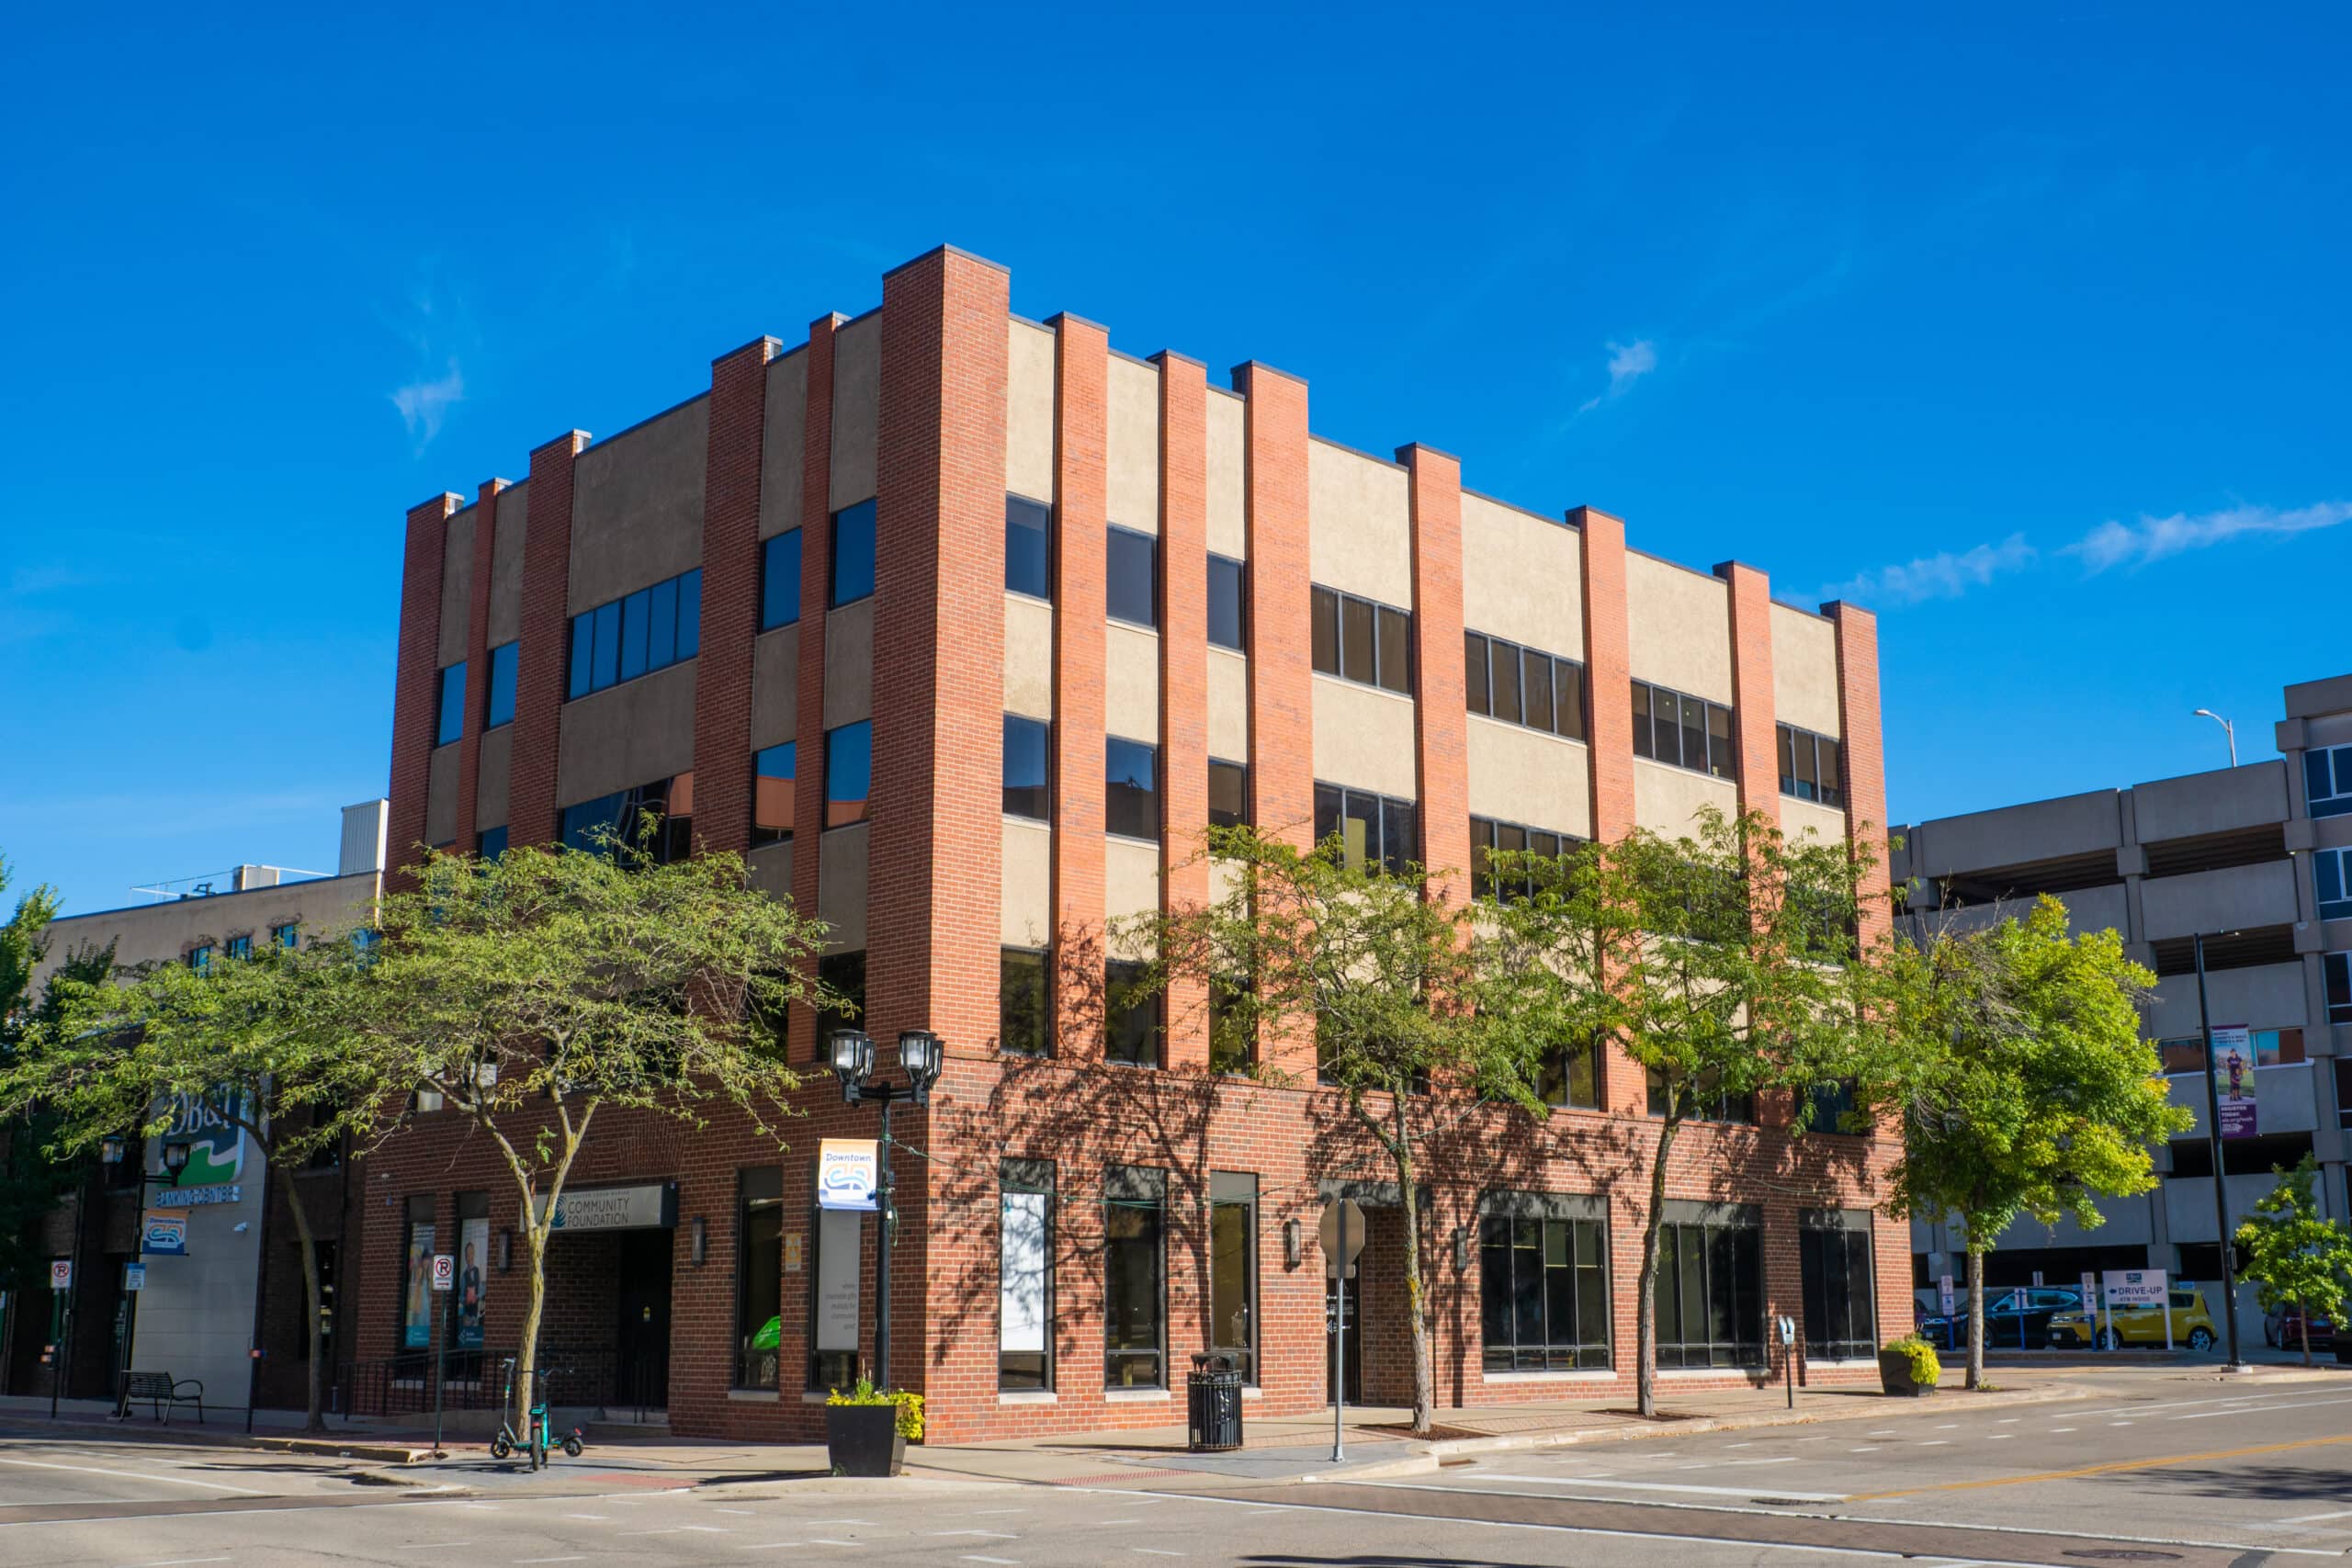 Photo of the GCRCF office building downtown Cedar Rapids